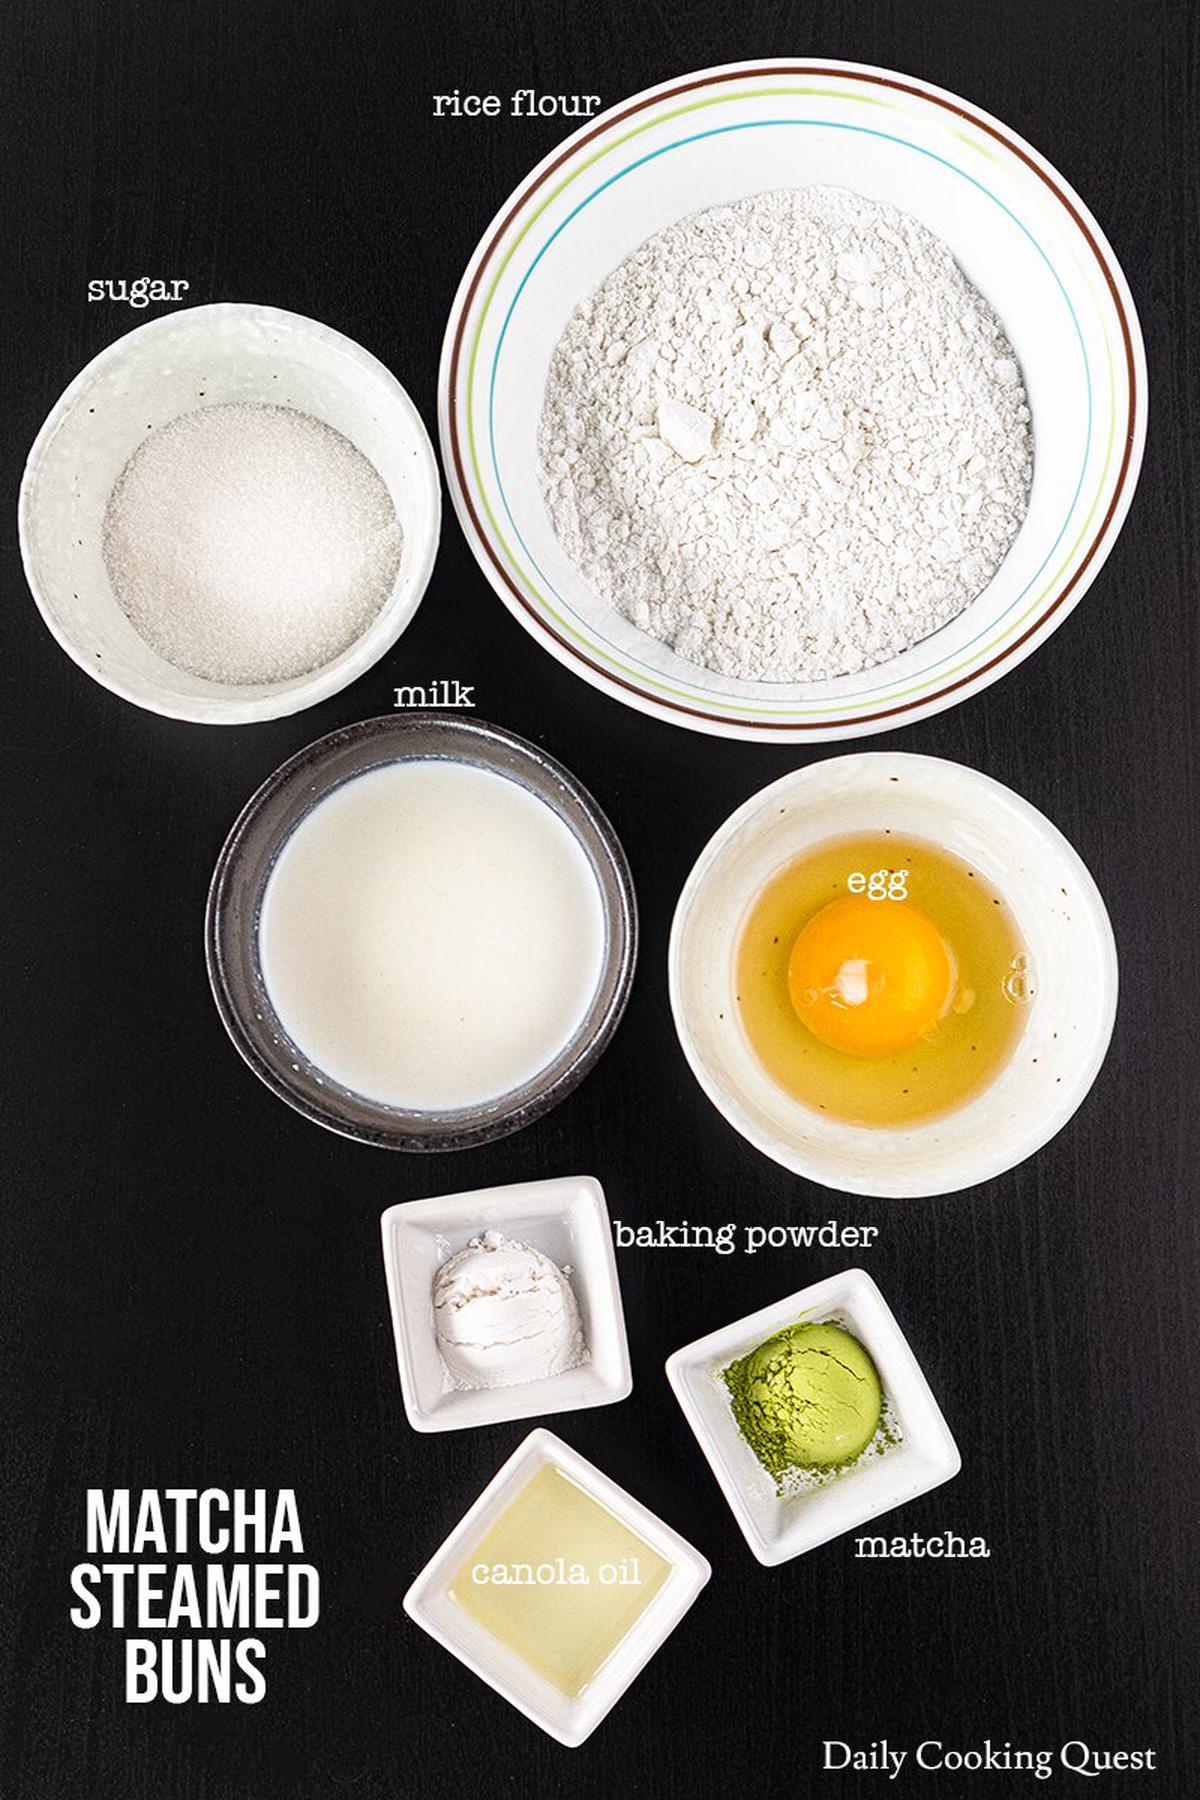 What you need for matcha steamed buns: rice flour, matcha, sugar, baking powder, egg, milk, and canola oil.